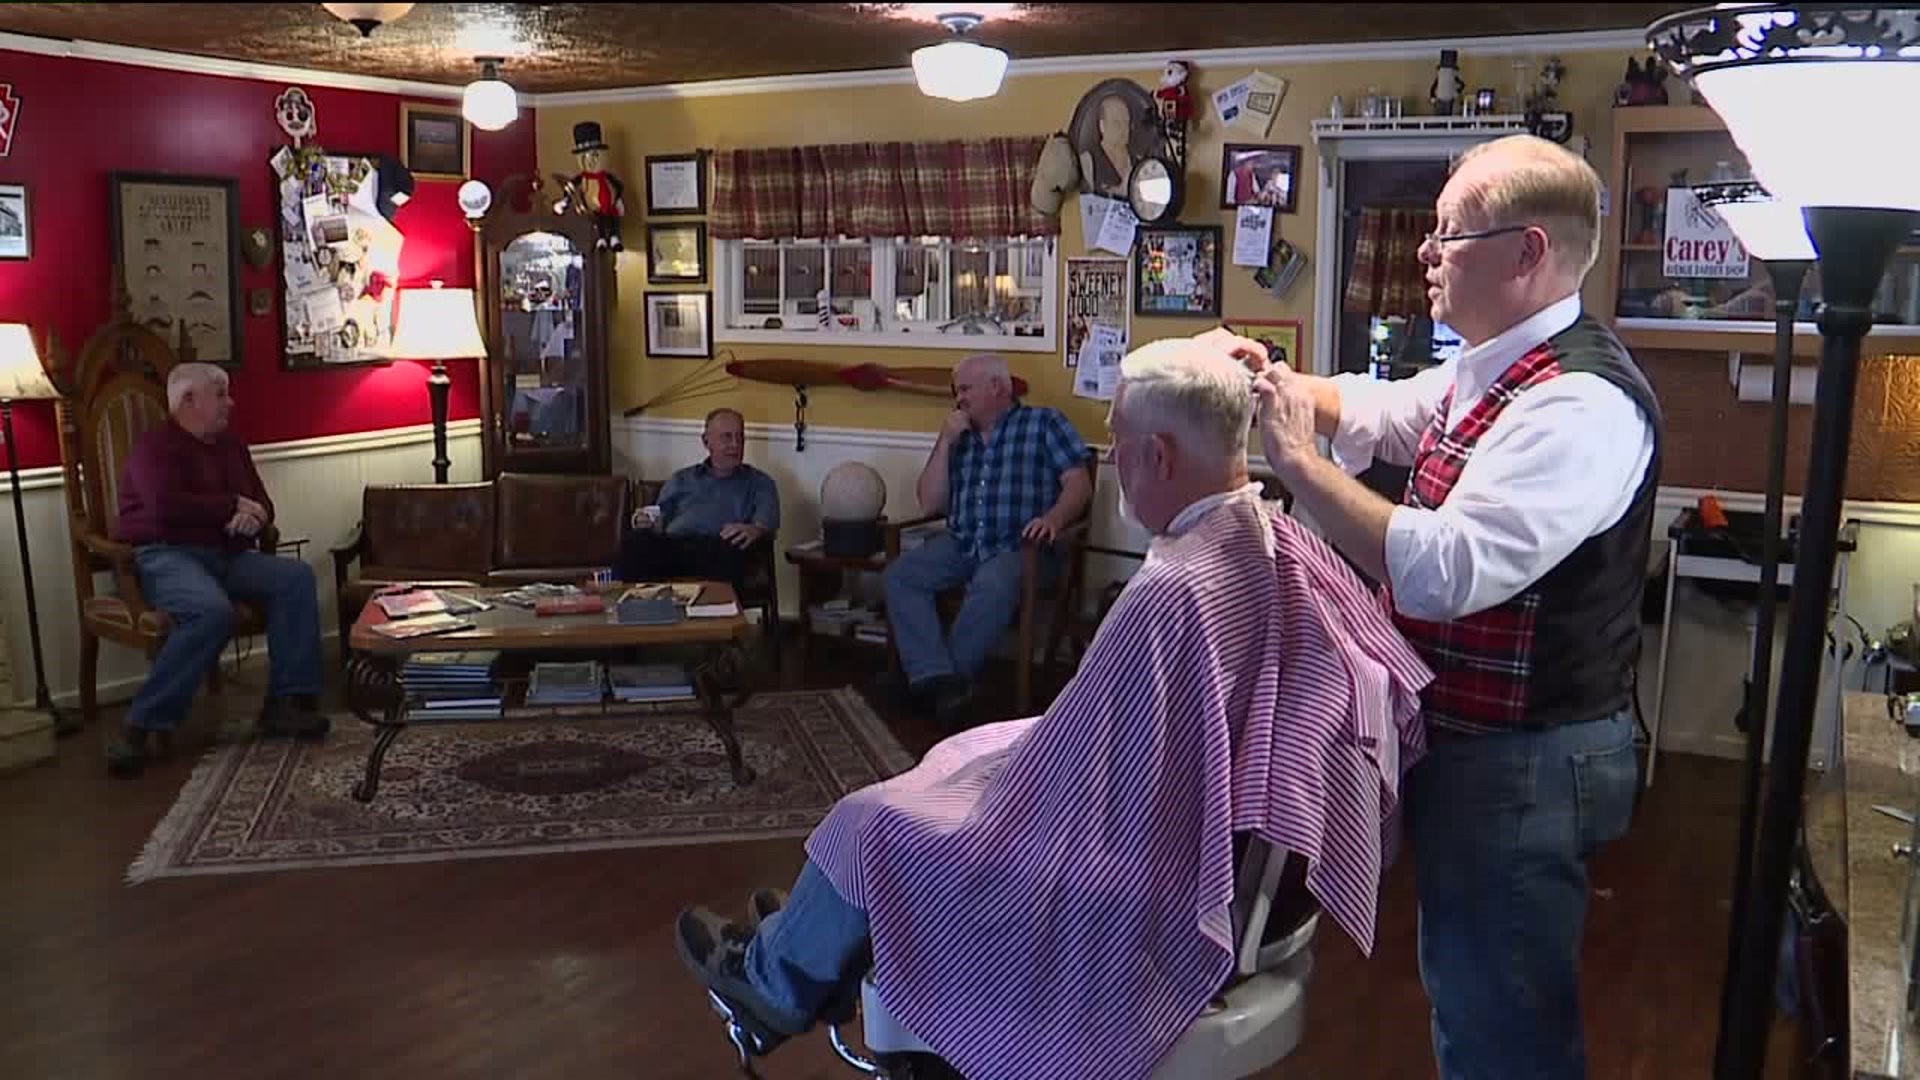 On The Pennsylvania Road: A Barbershop from the Past